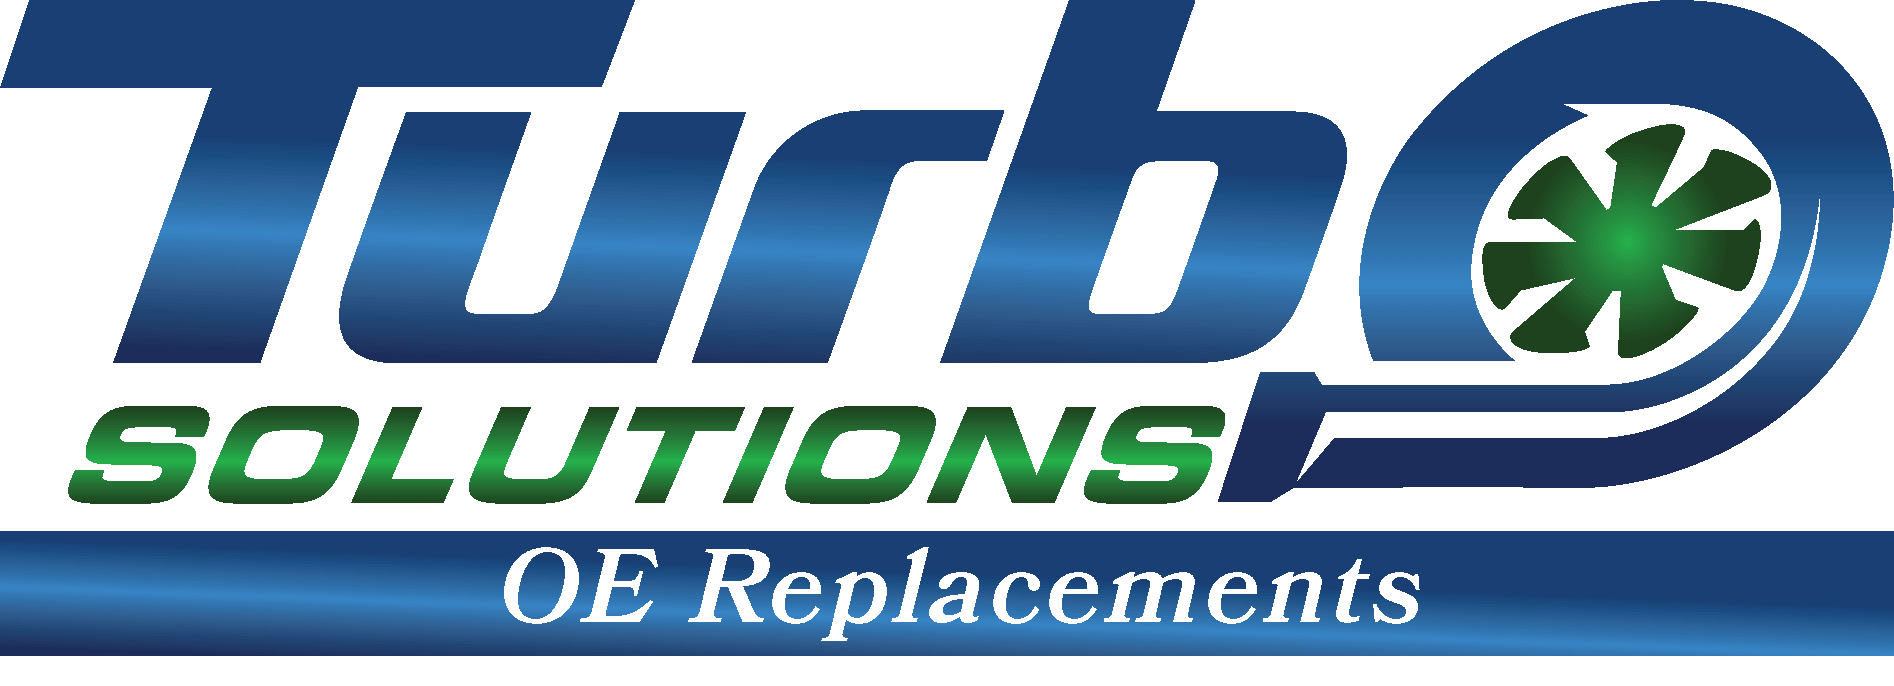 Turbo Solution Logo with oe Replacement